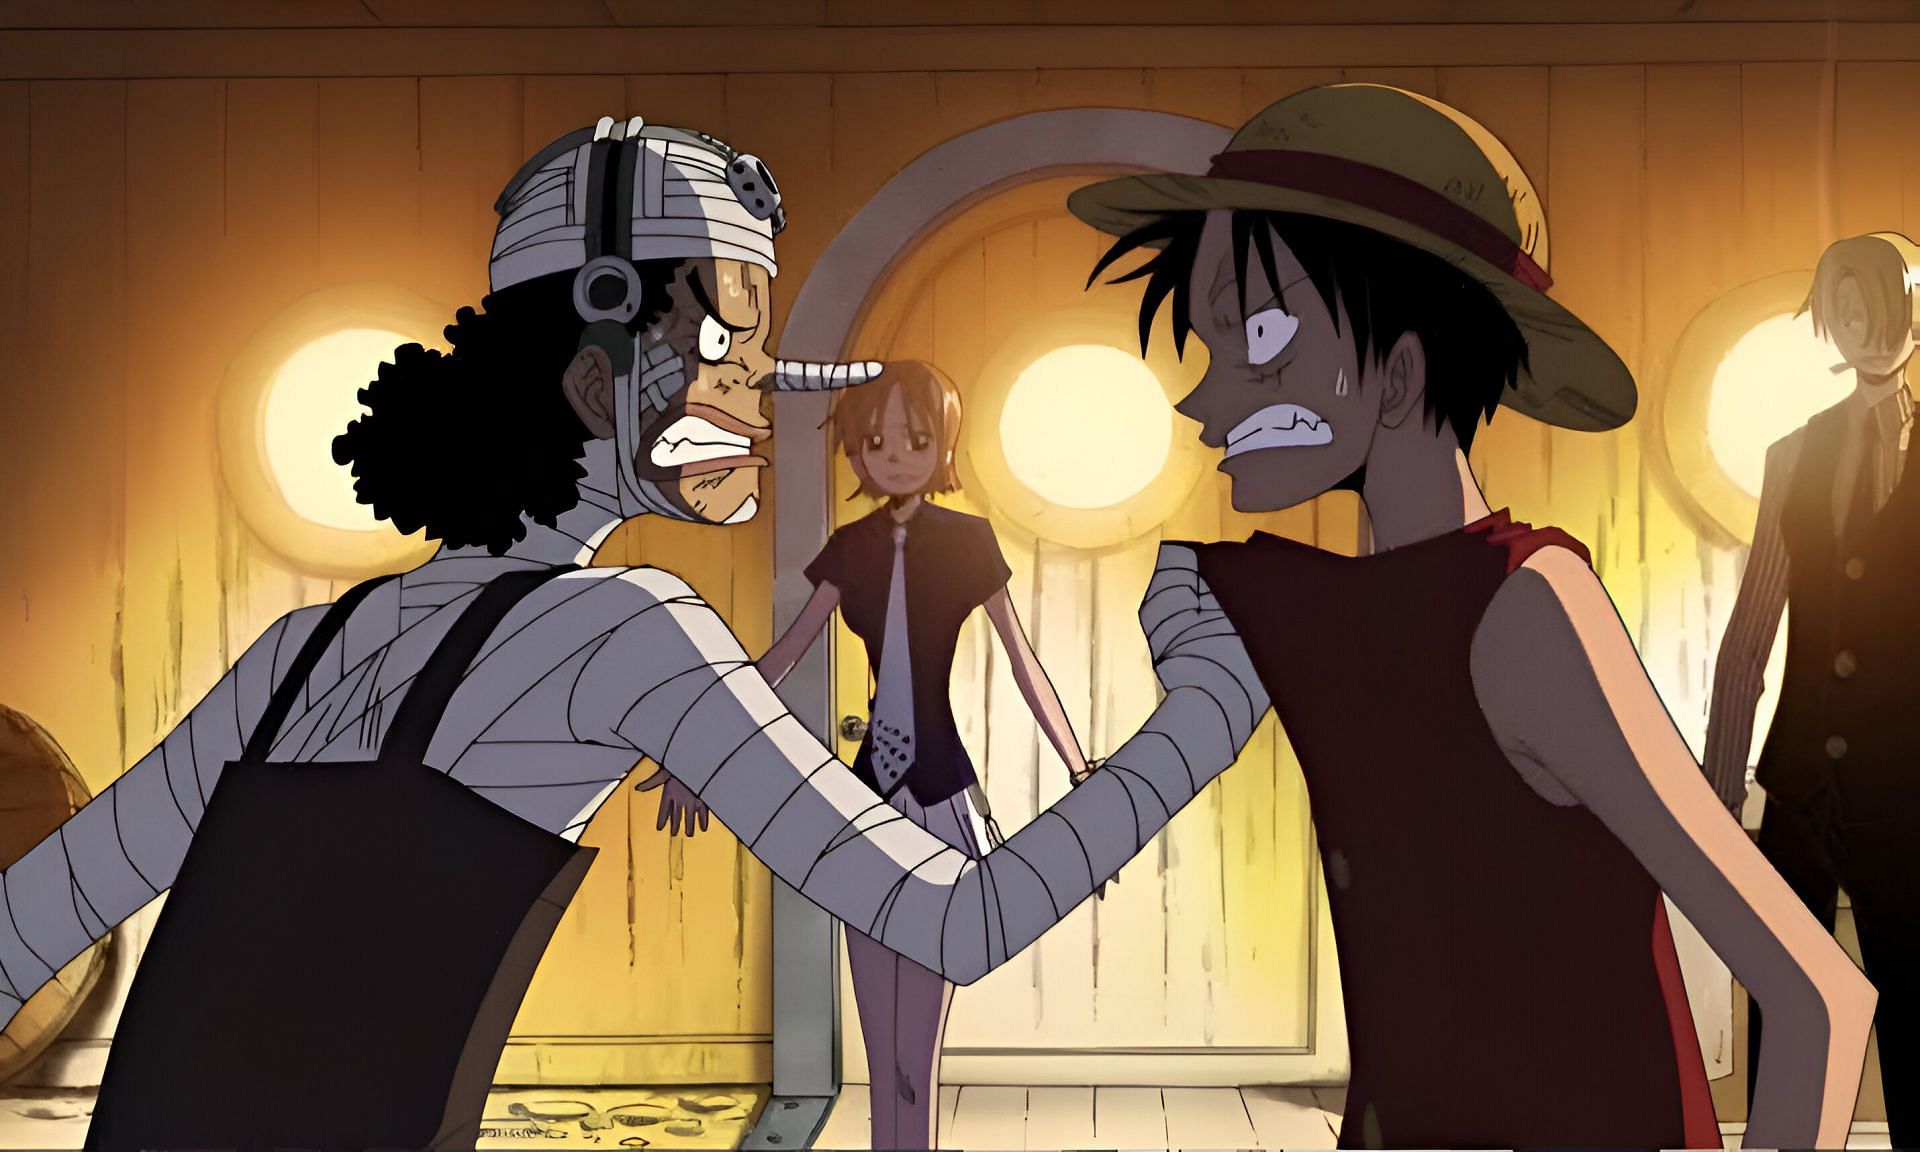 Usopp (left) and Luffy (right) as seen in the anime (Image via Toei Animation)